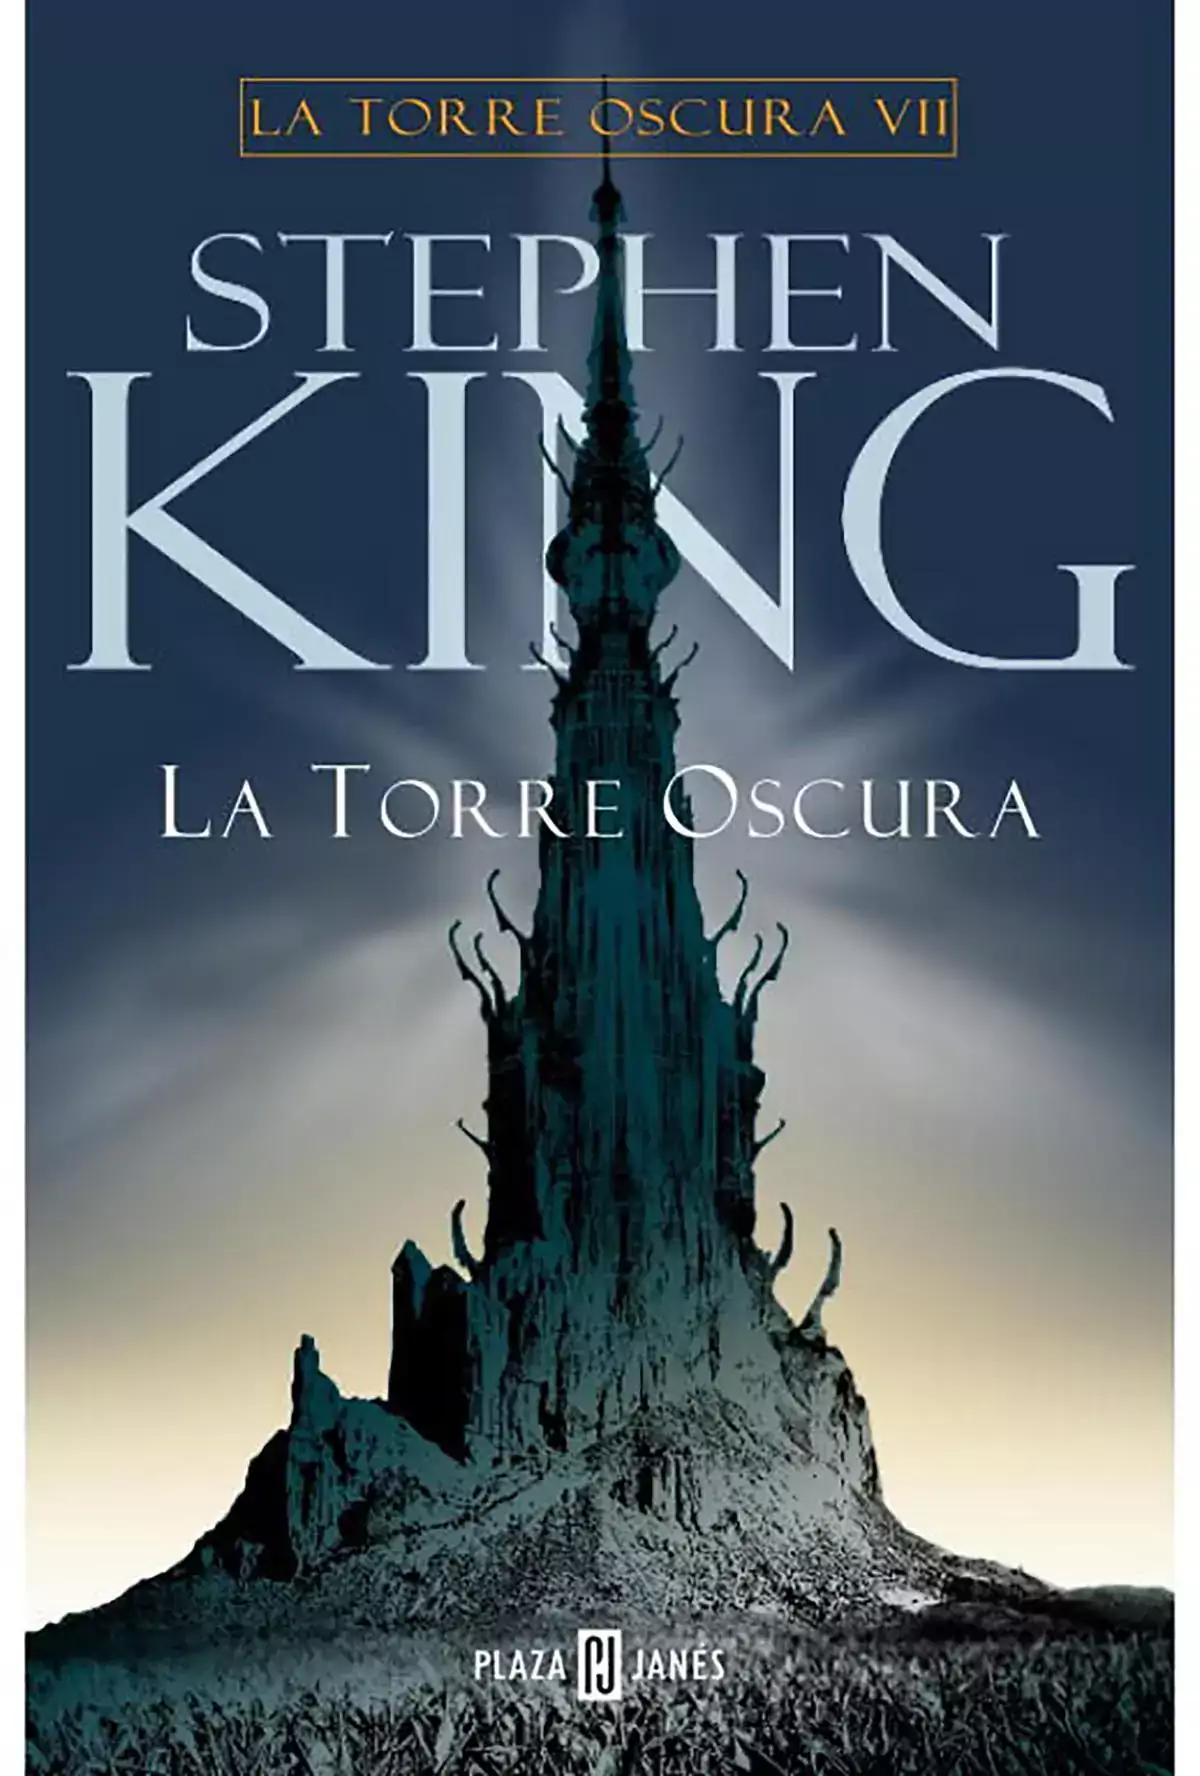 "The Dark Tower" by Stephen King